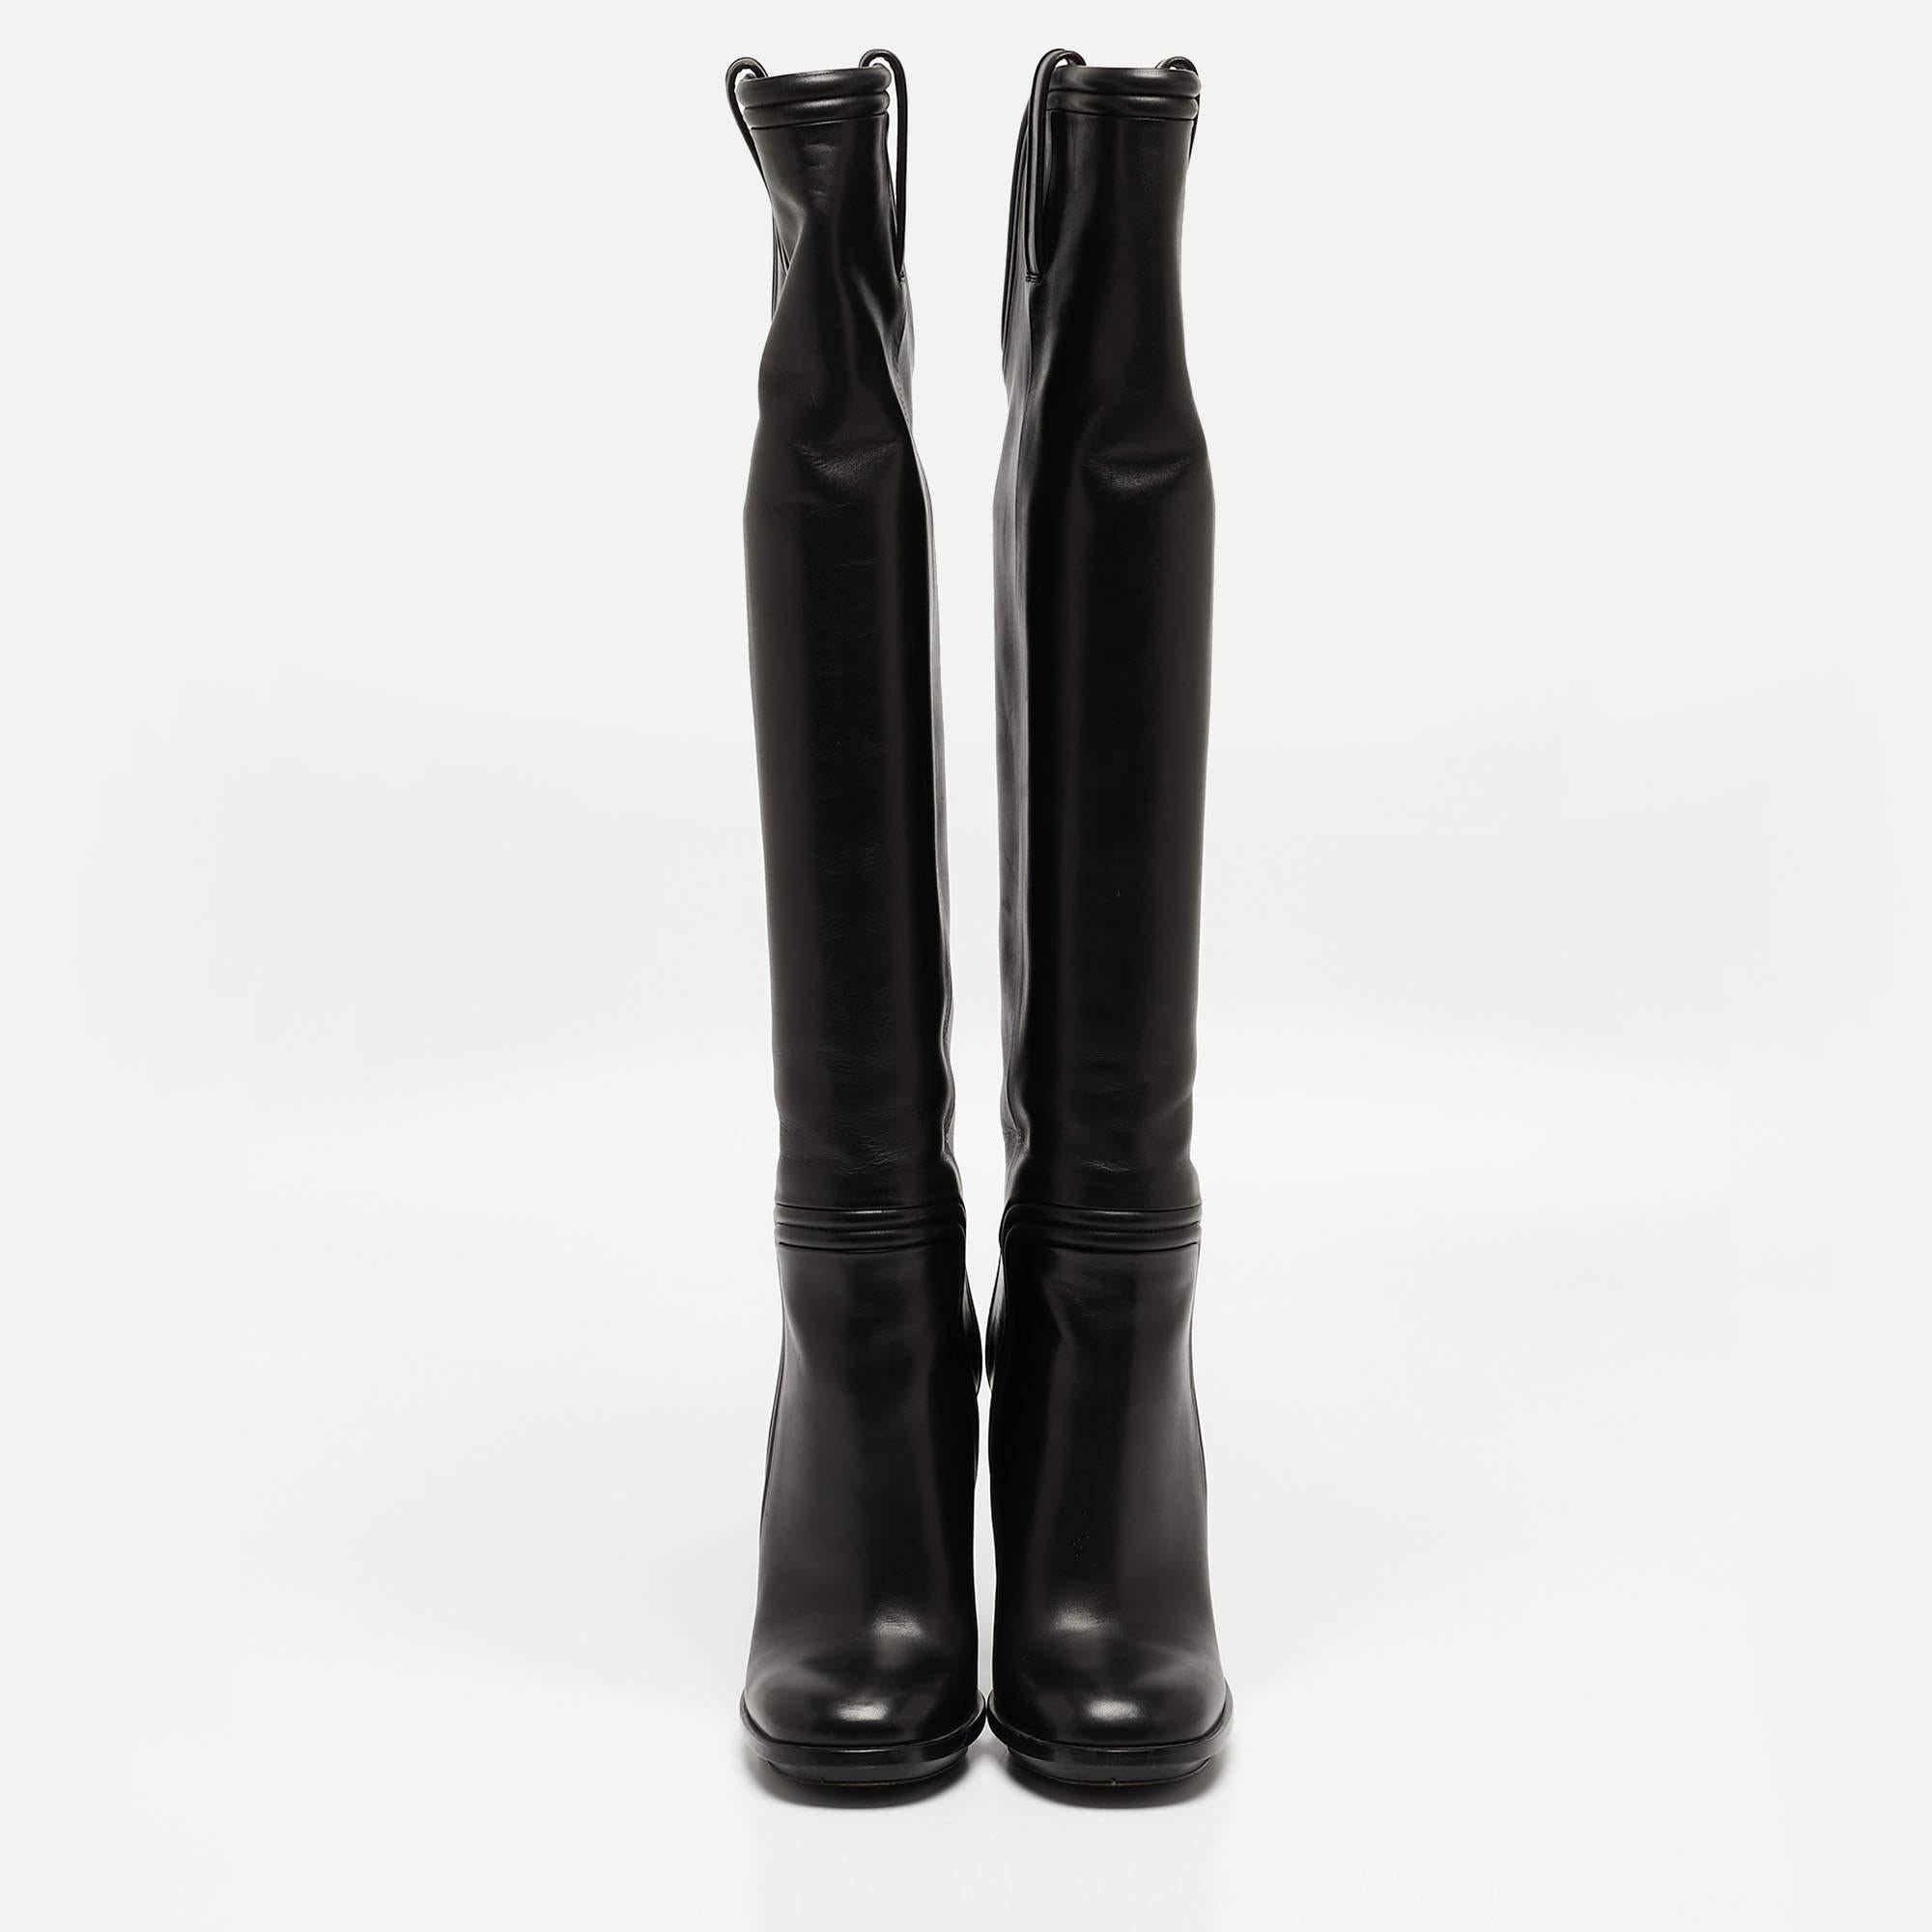 Enjoy the most fashionable days with these stylish Gucci black boots. Modern in design and craftsmanship, they are fashioned to keep you comfortable and chic!

